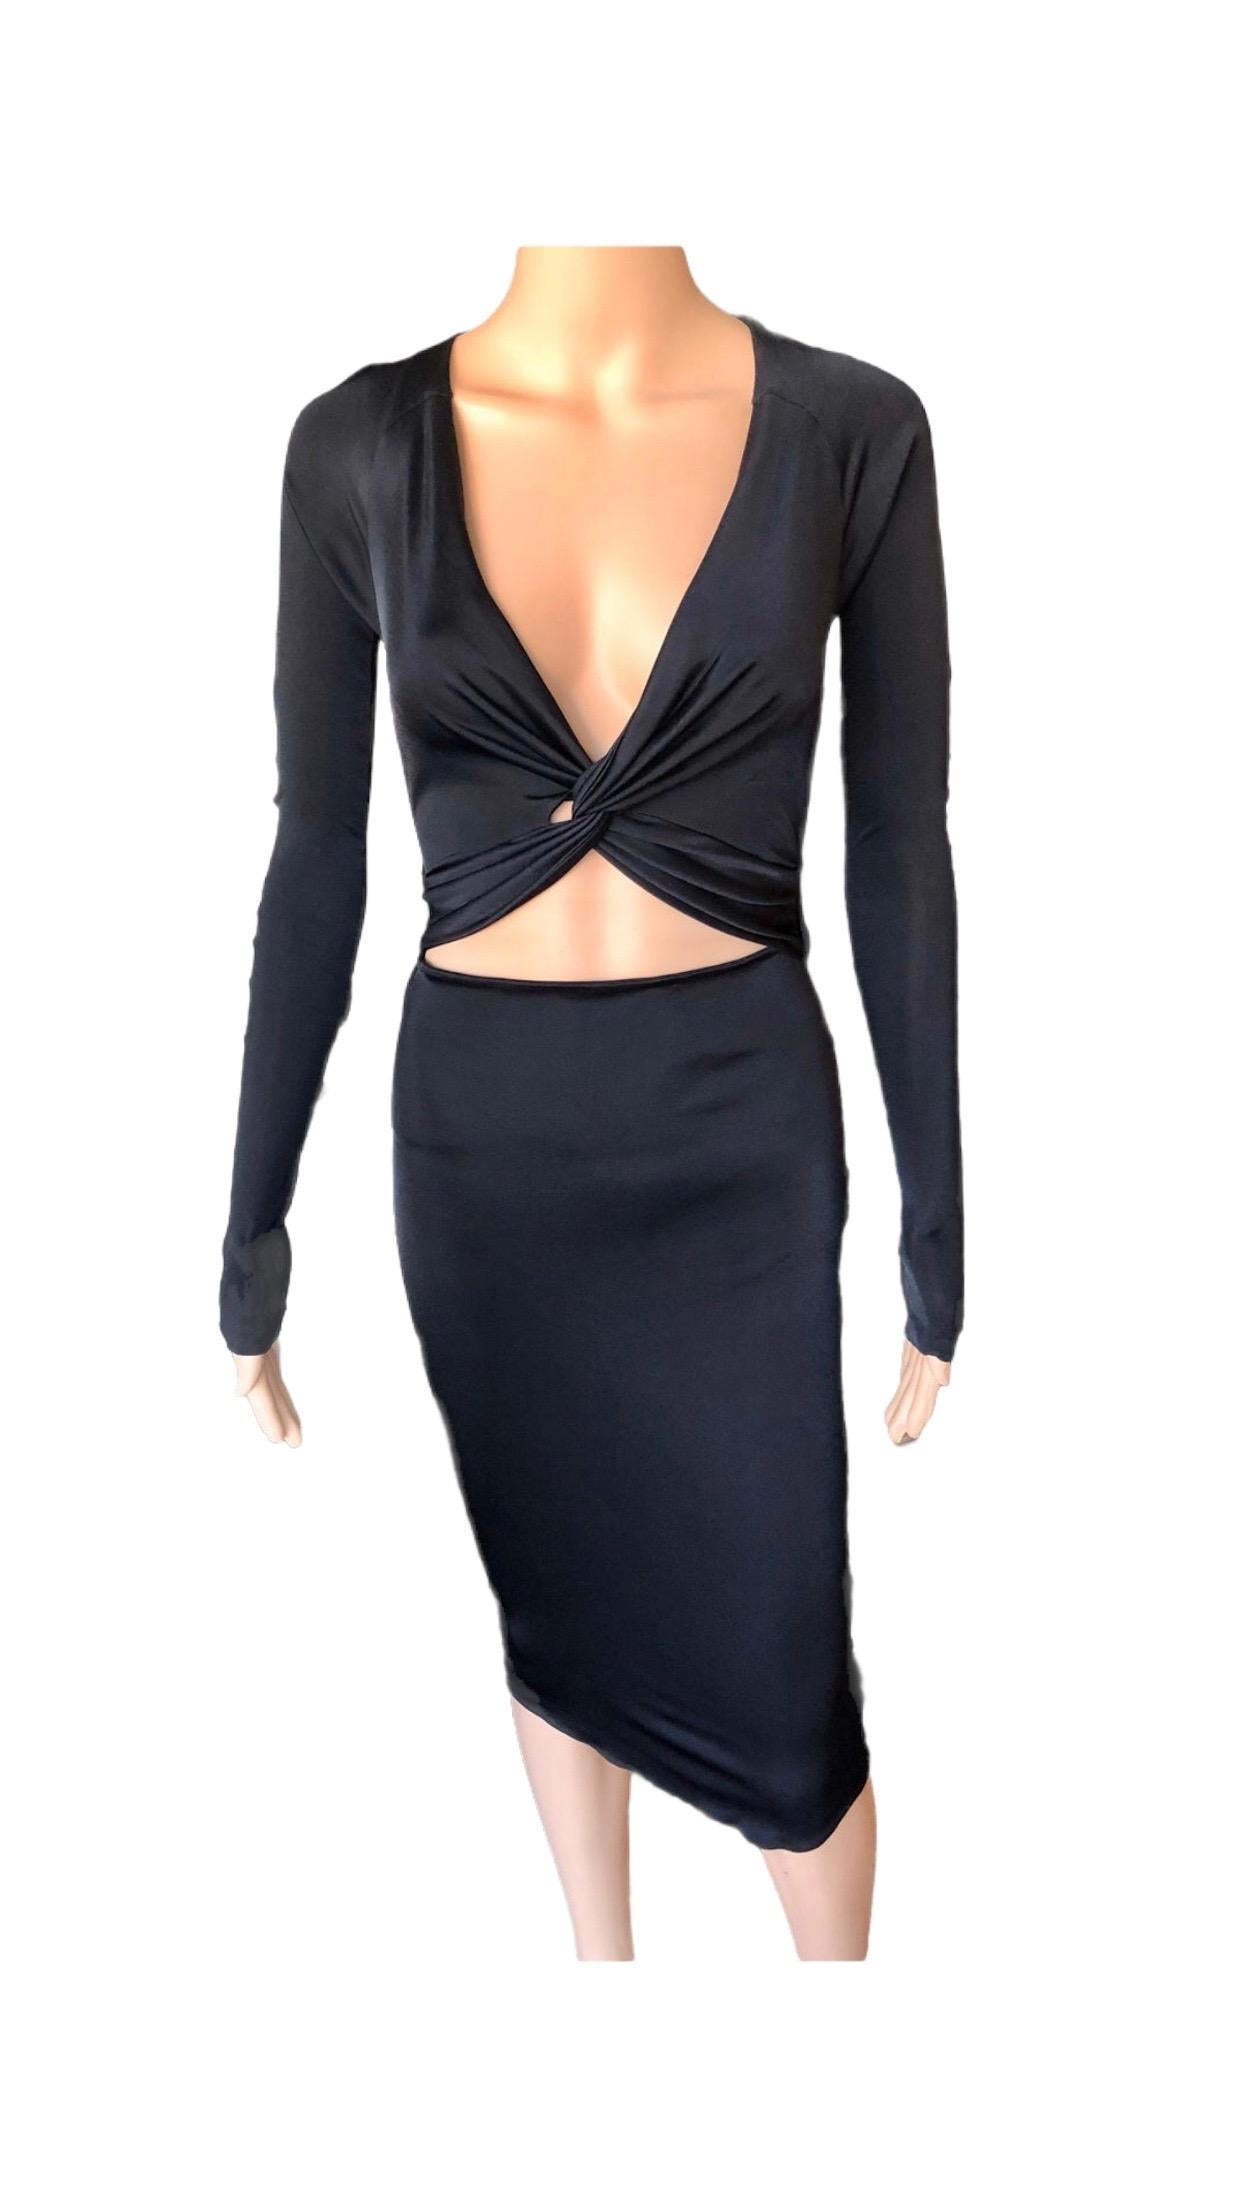 Gucci S/S 2005 Tom Ford Plunging Cutout Backless Bodycon Black Dress en vente 5